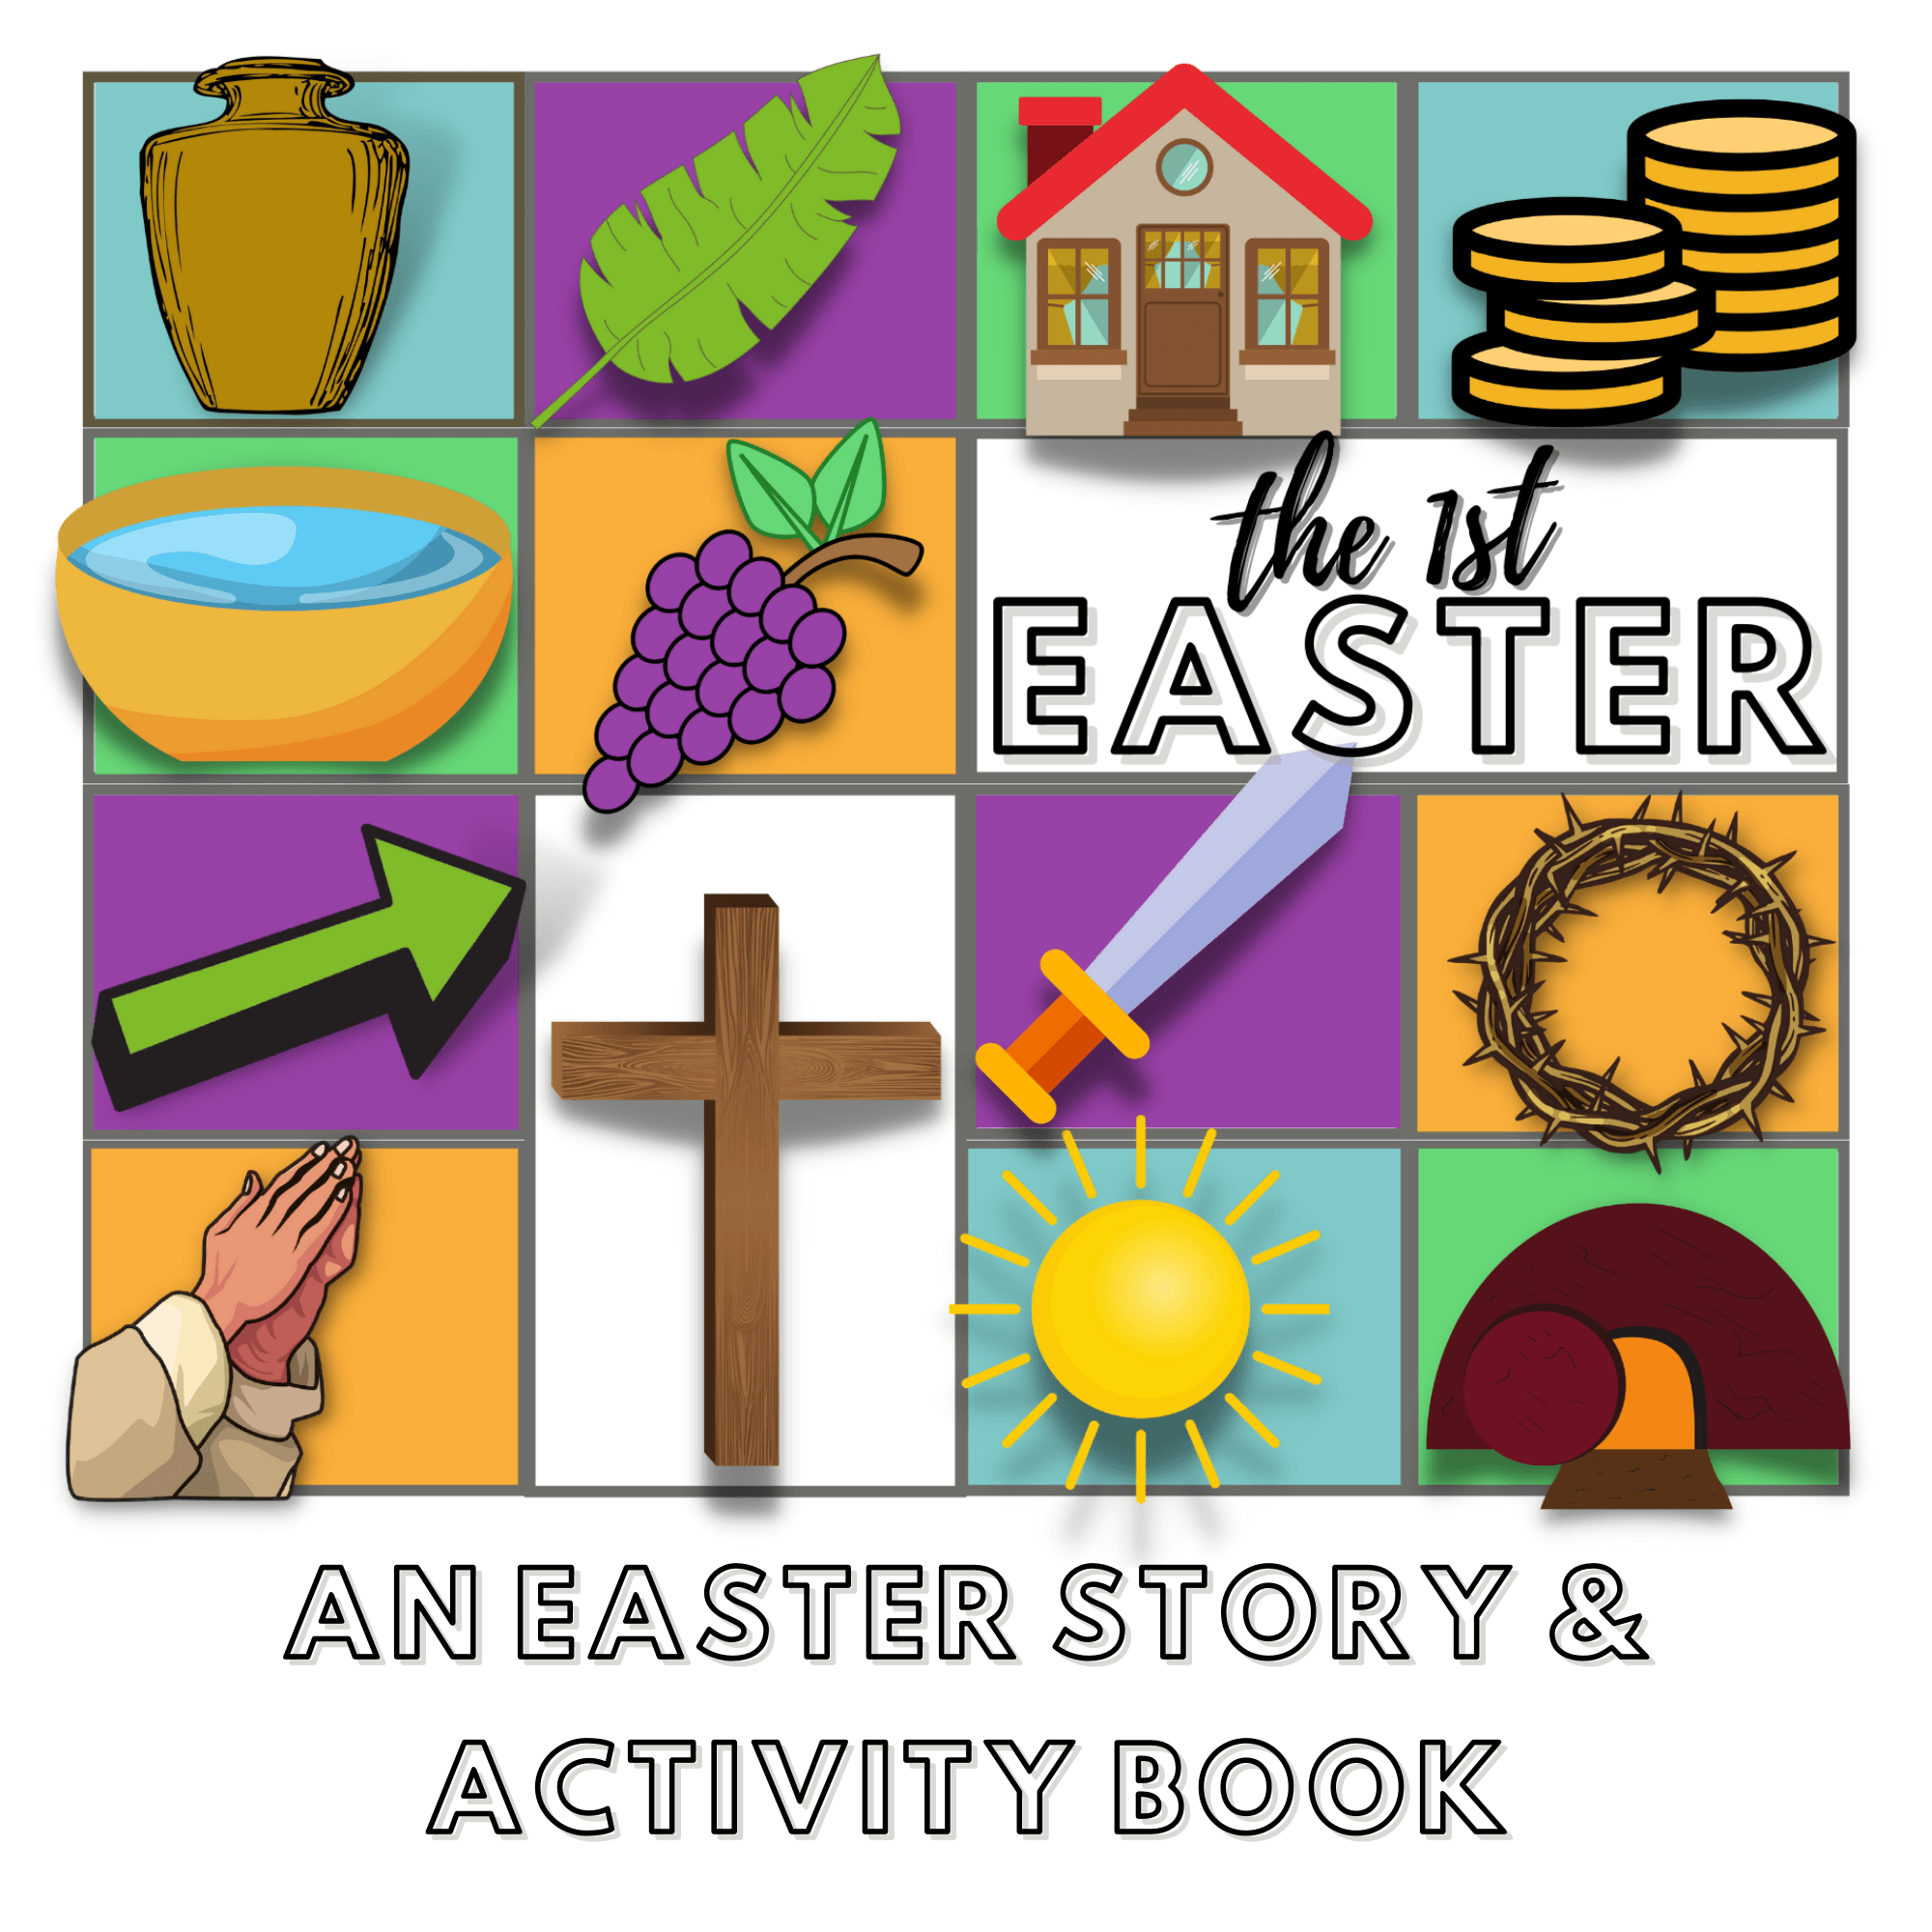 The 1st Easter: Story in Pictures" Kids Activity Book (printable down - Sunday School Store